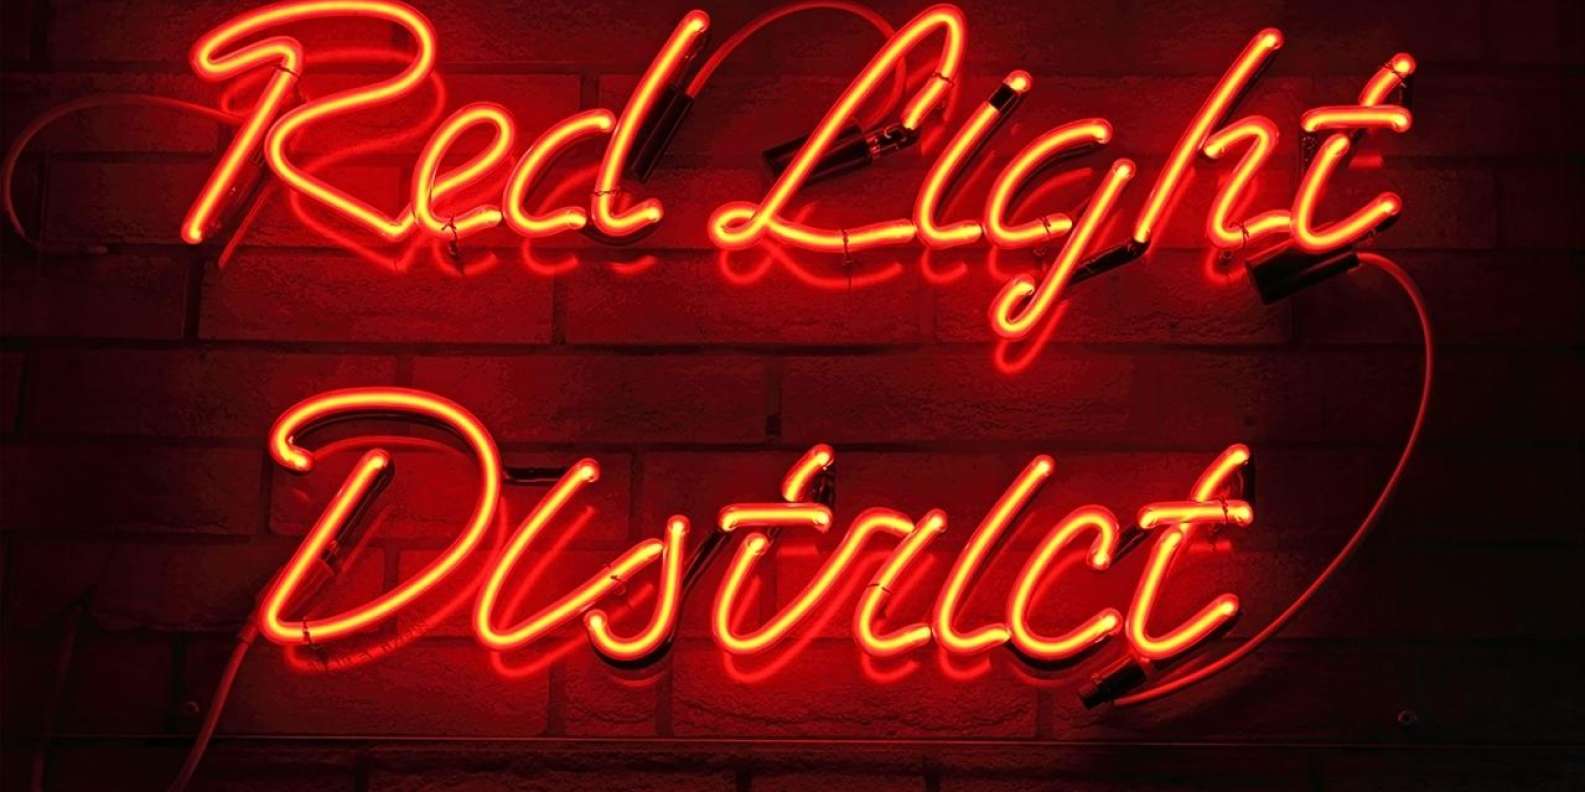 What street is the red light district on